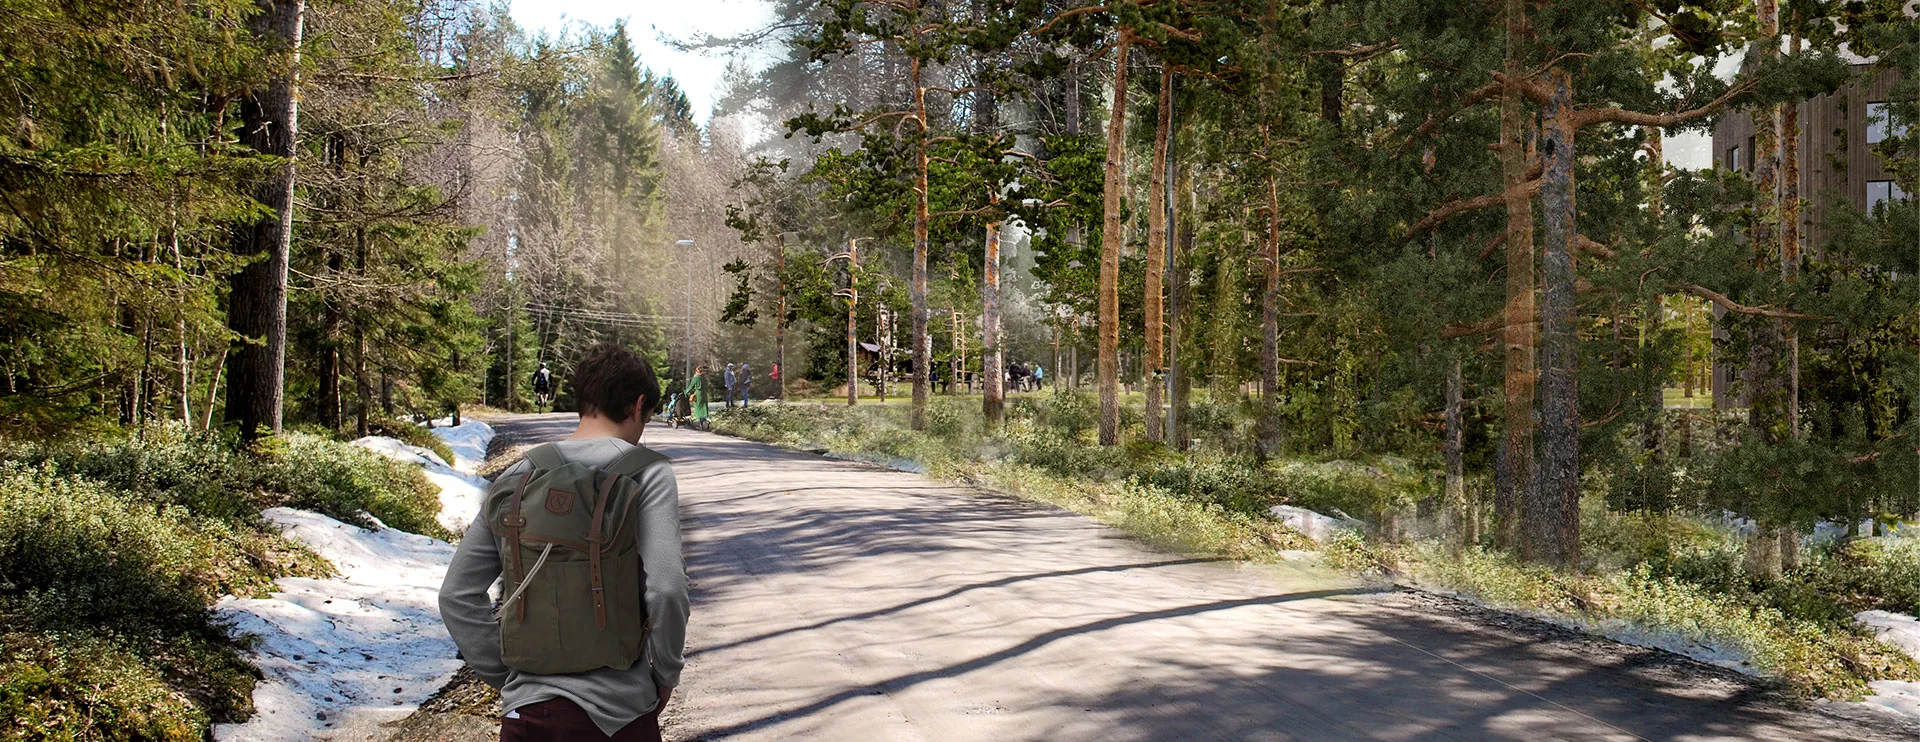 A person is walking on a forest path.